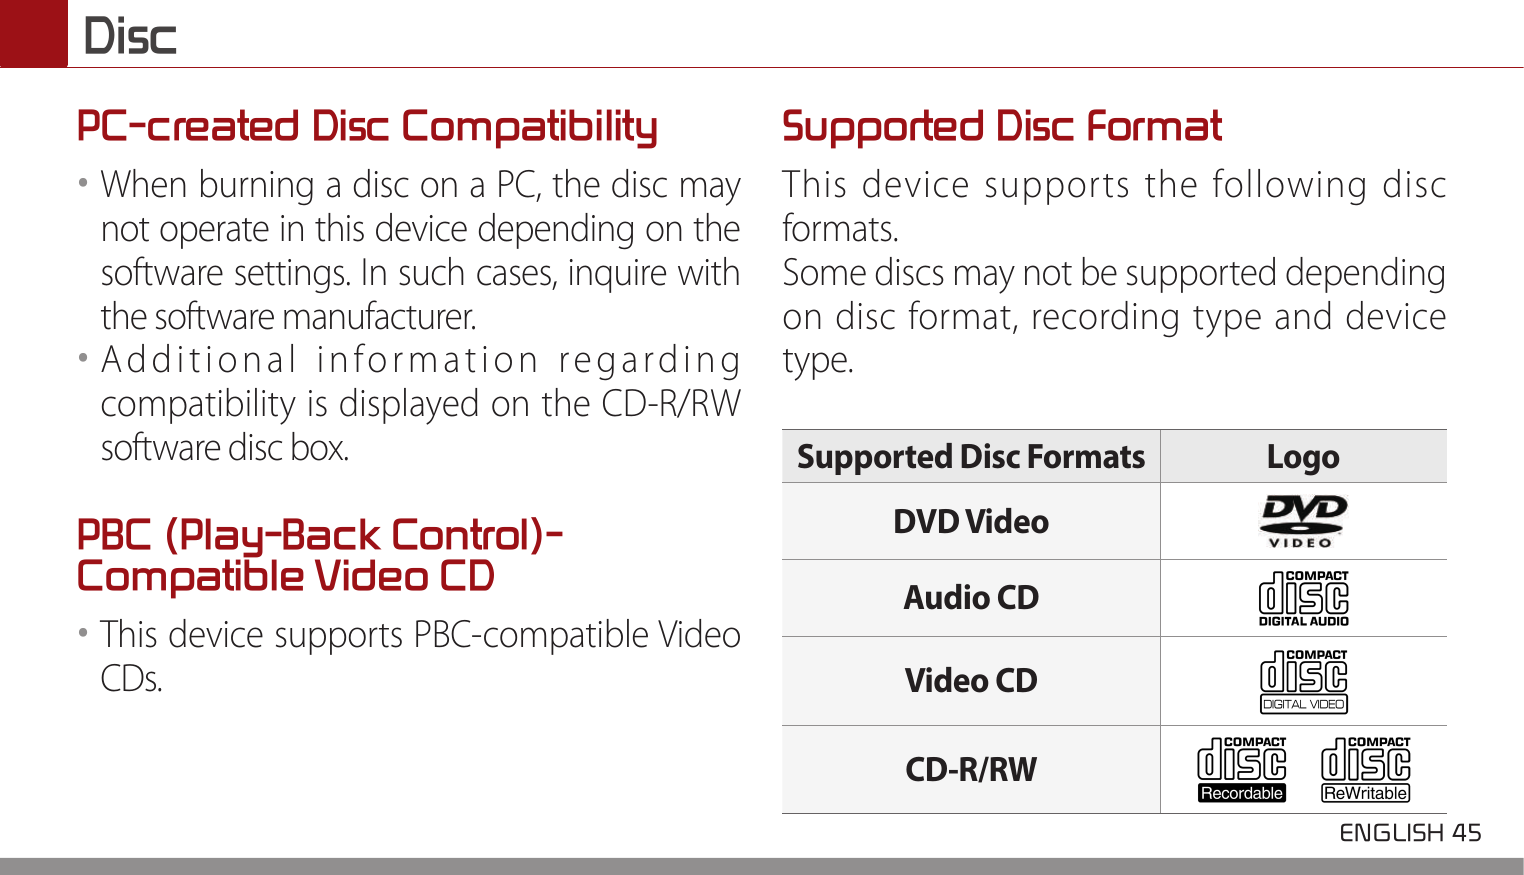  ENGLISH 45 DiscPC-created Disc Compatibility••When burning a disc on a PC, the disc may not operate in this device depending on the software settings. In such cases, inquire with the software manufacturer.••Additional information regarding compatibility is displayed on the CD-R/RW software disc box.PBC (Play-Back Control)-Compatible Video CD••This device supports PBC-compatible Video CDs.Supported Disc FormatThis device supports the following disc formats.Some discs may not be supported depending on disc format, recording type and device type.Supported Disc Formats LogoDVD VideoAudio CDVideo CDCD-R/RW      